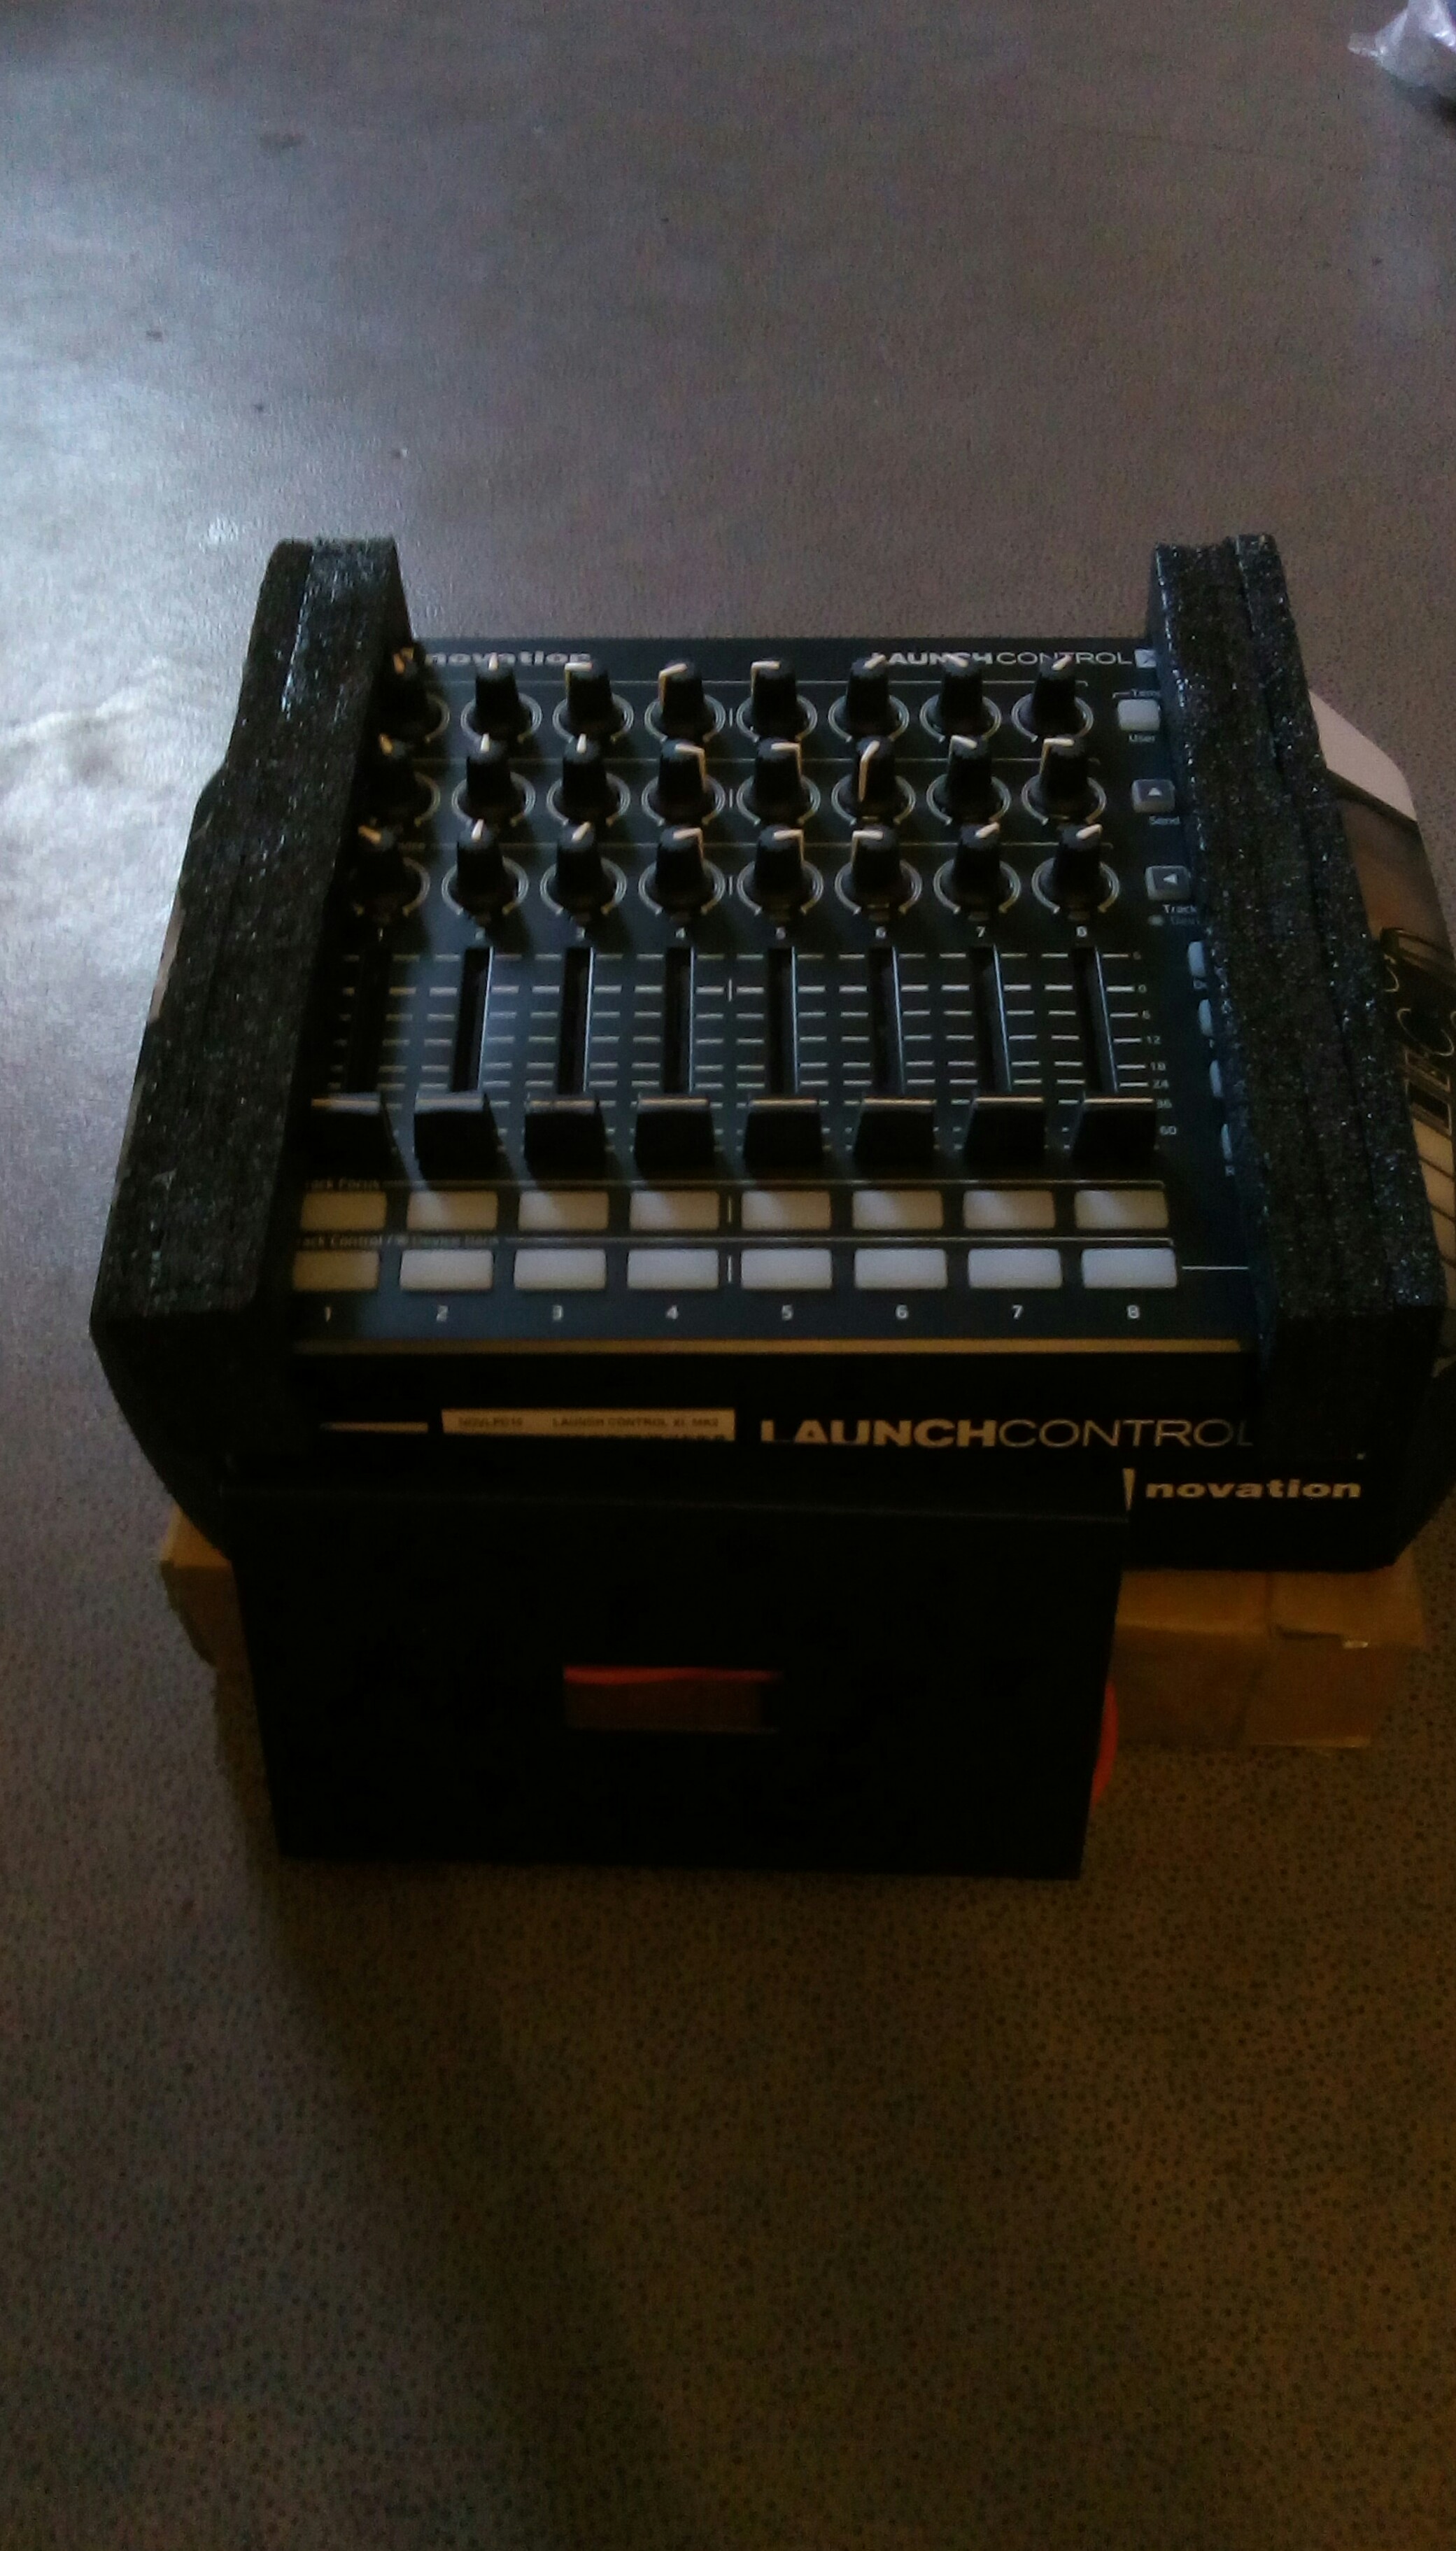 launchcontrol xl faceplate